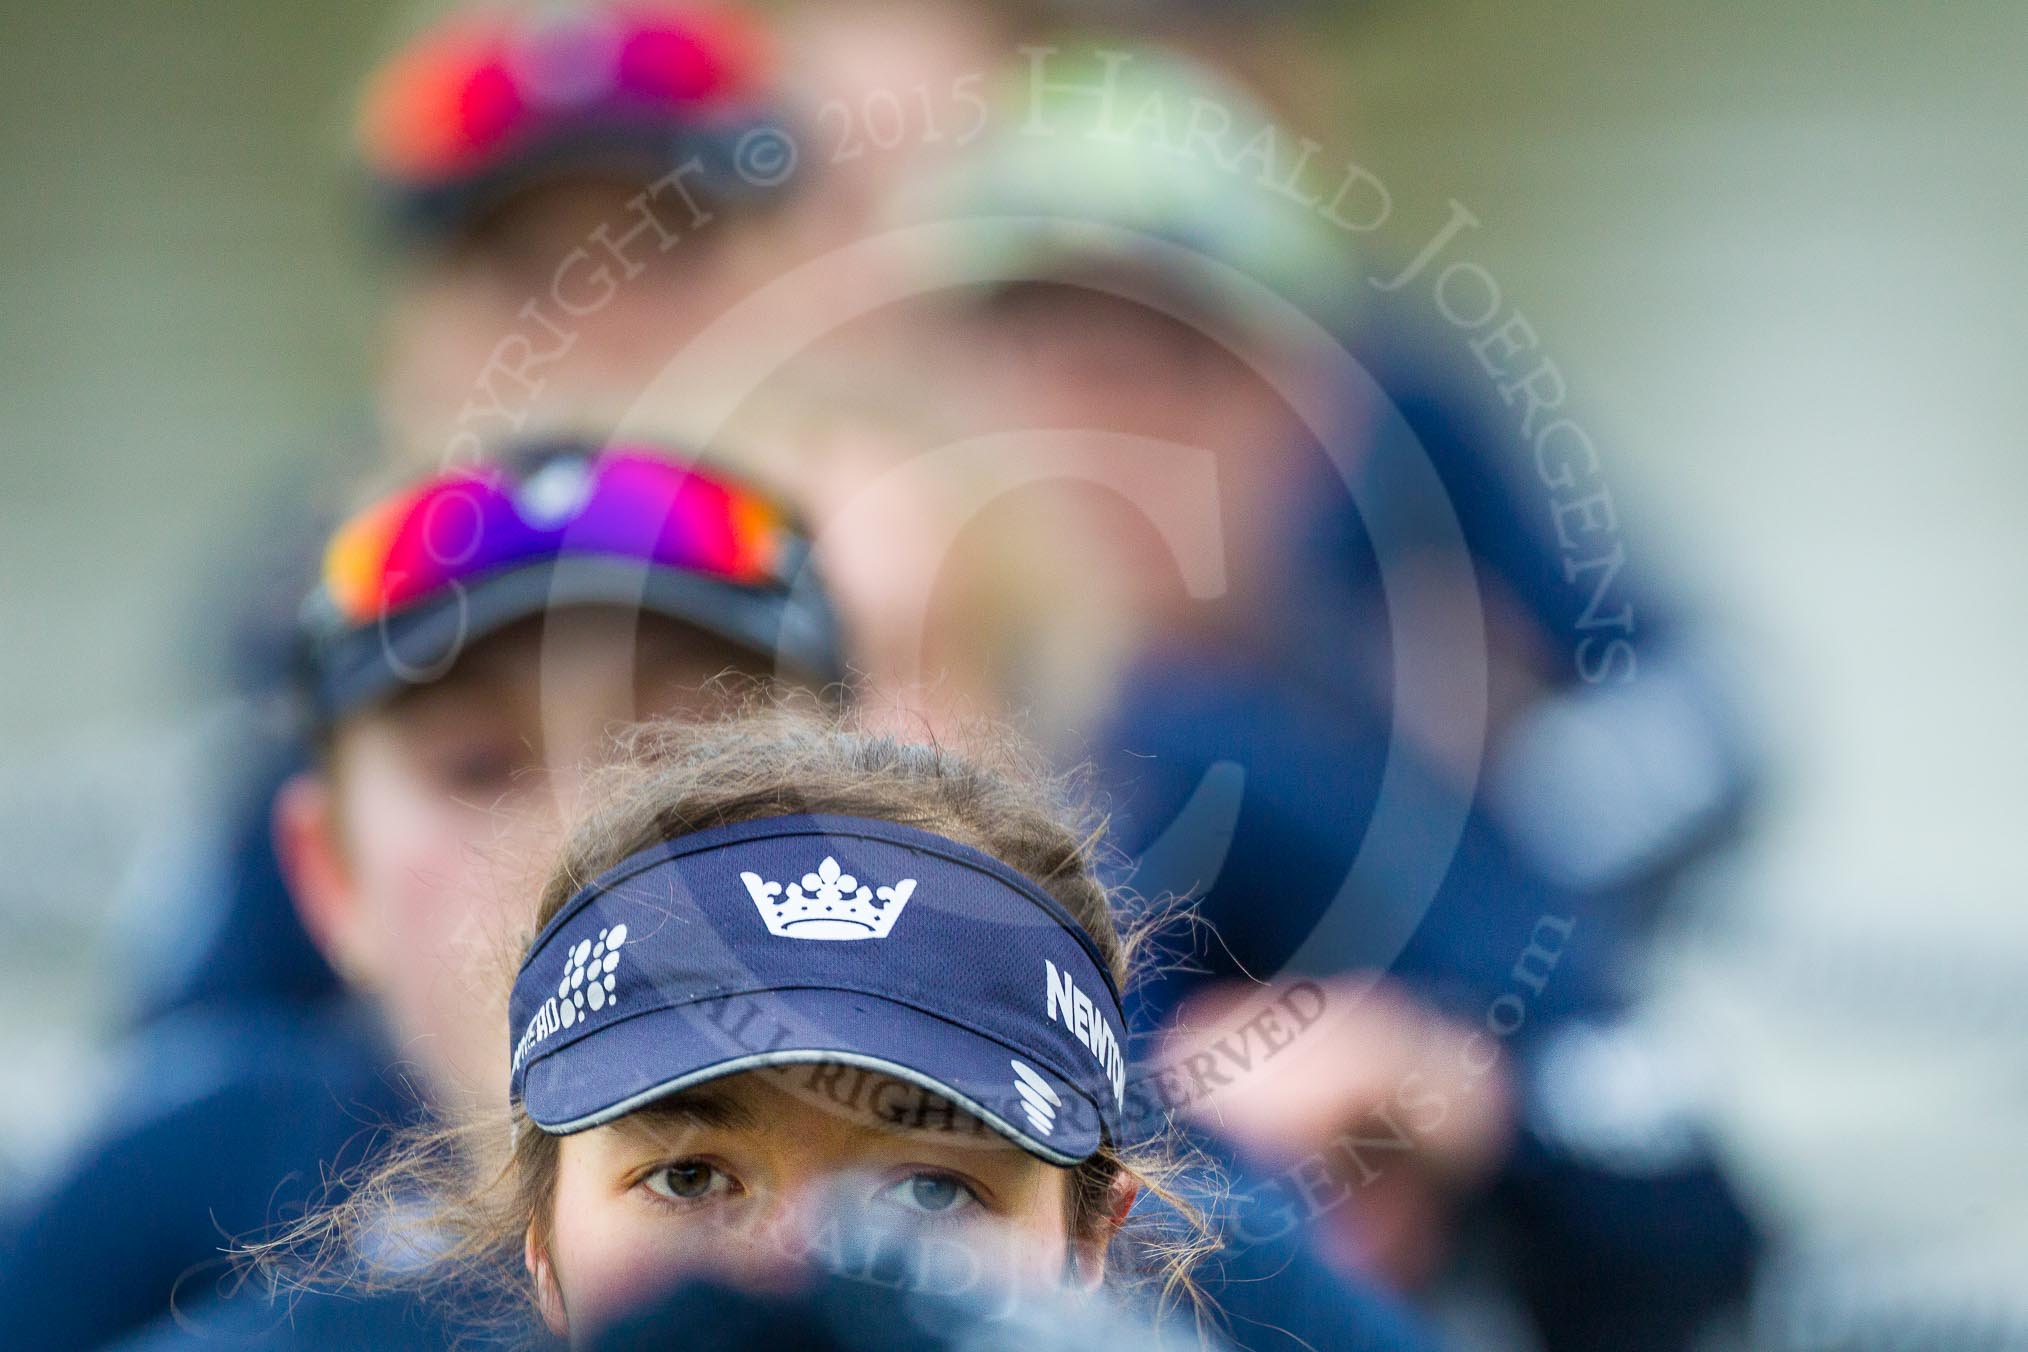 The Boat Race season 2016 - OUWBC training Wallingford: Lauren Kedar, stroke in the OUWBC Blue Boat.
River Thames,
Wallingford,
Oxfordshire,

on 29 February 2016 at 16:32, image #124